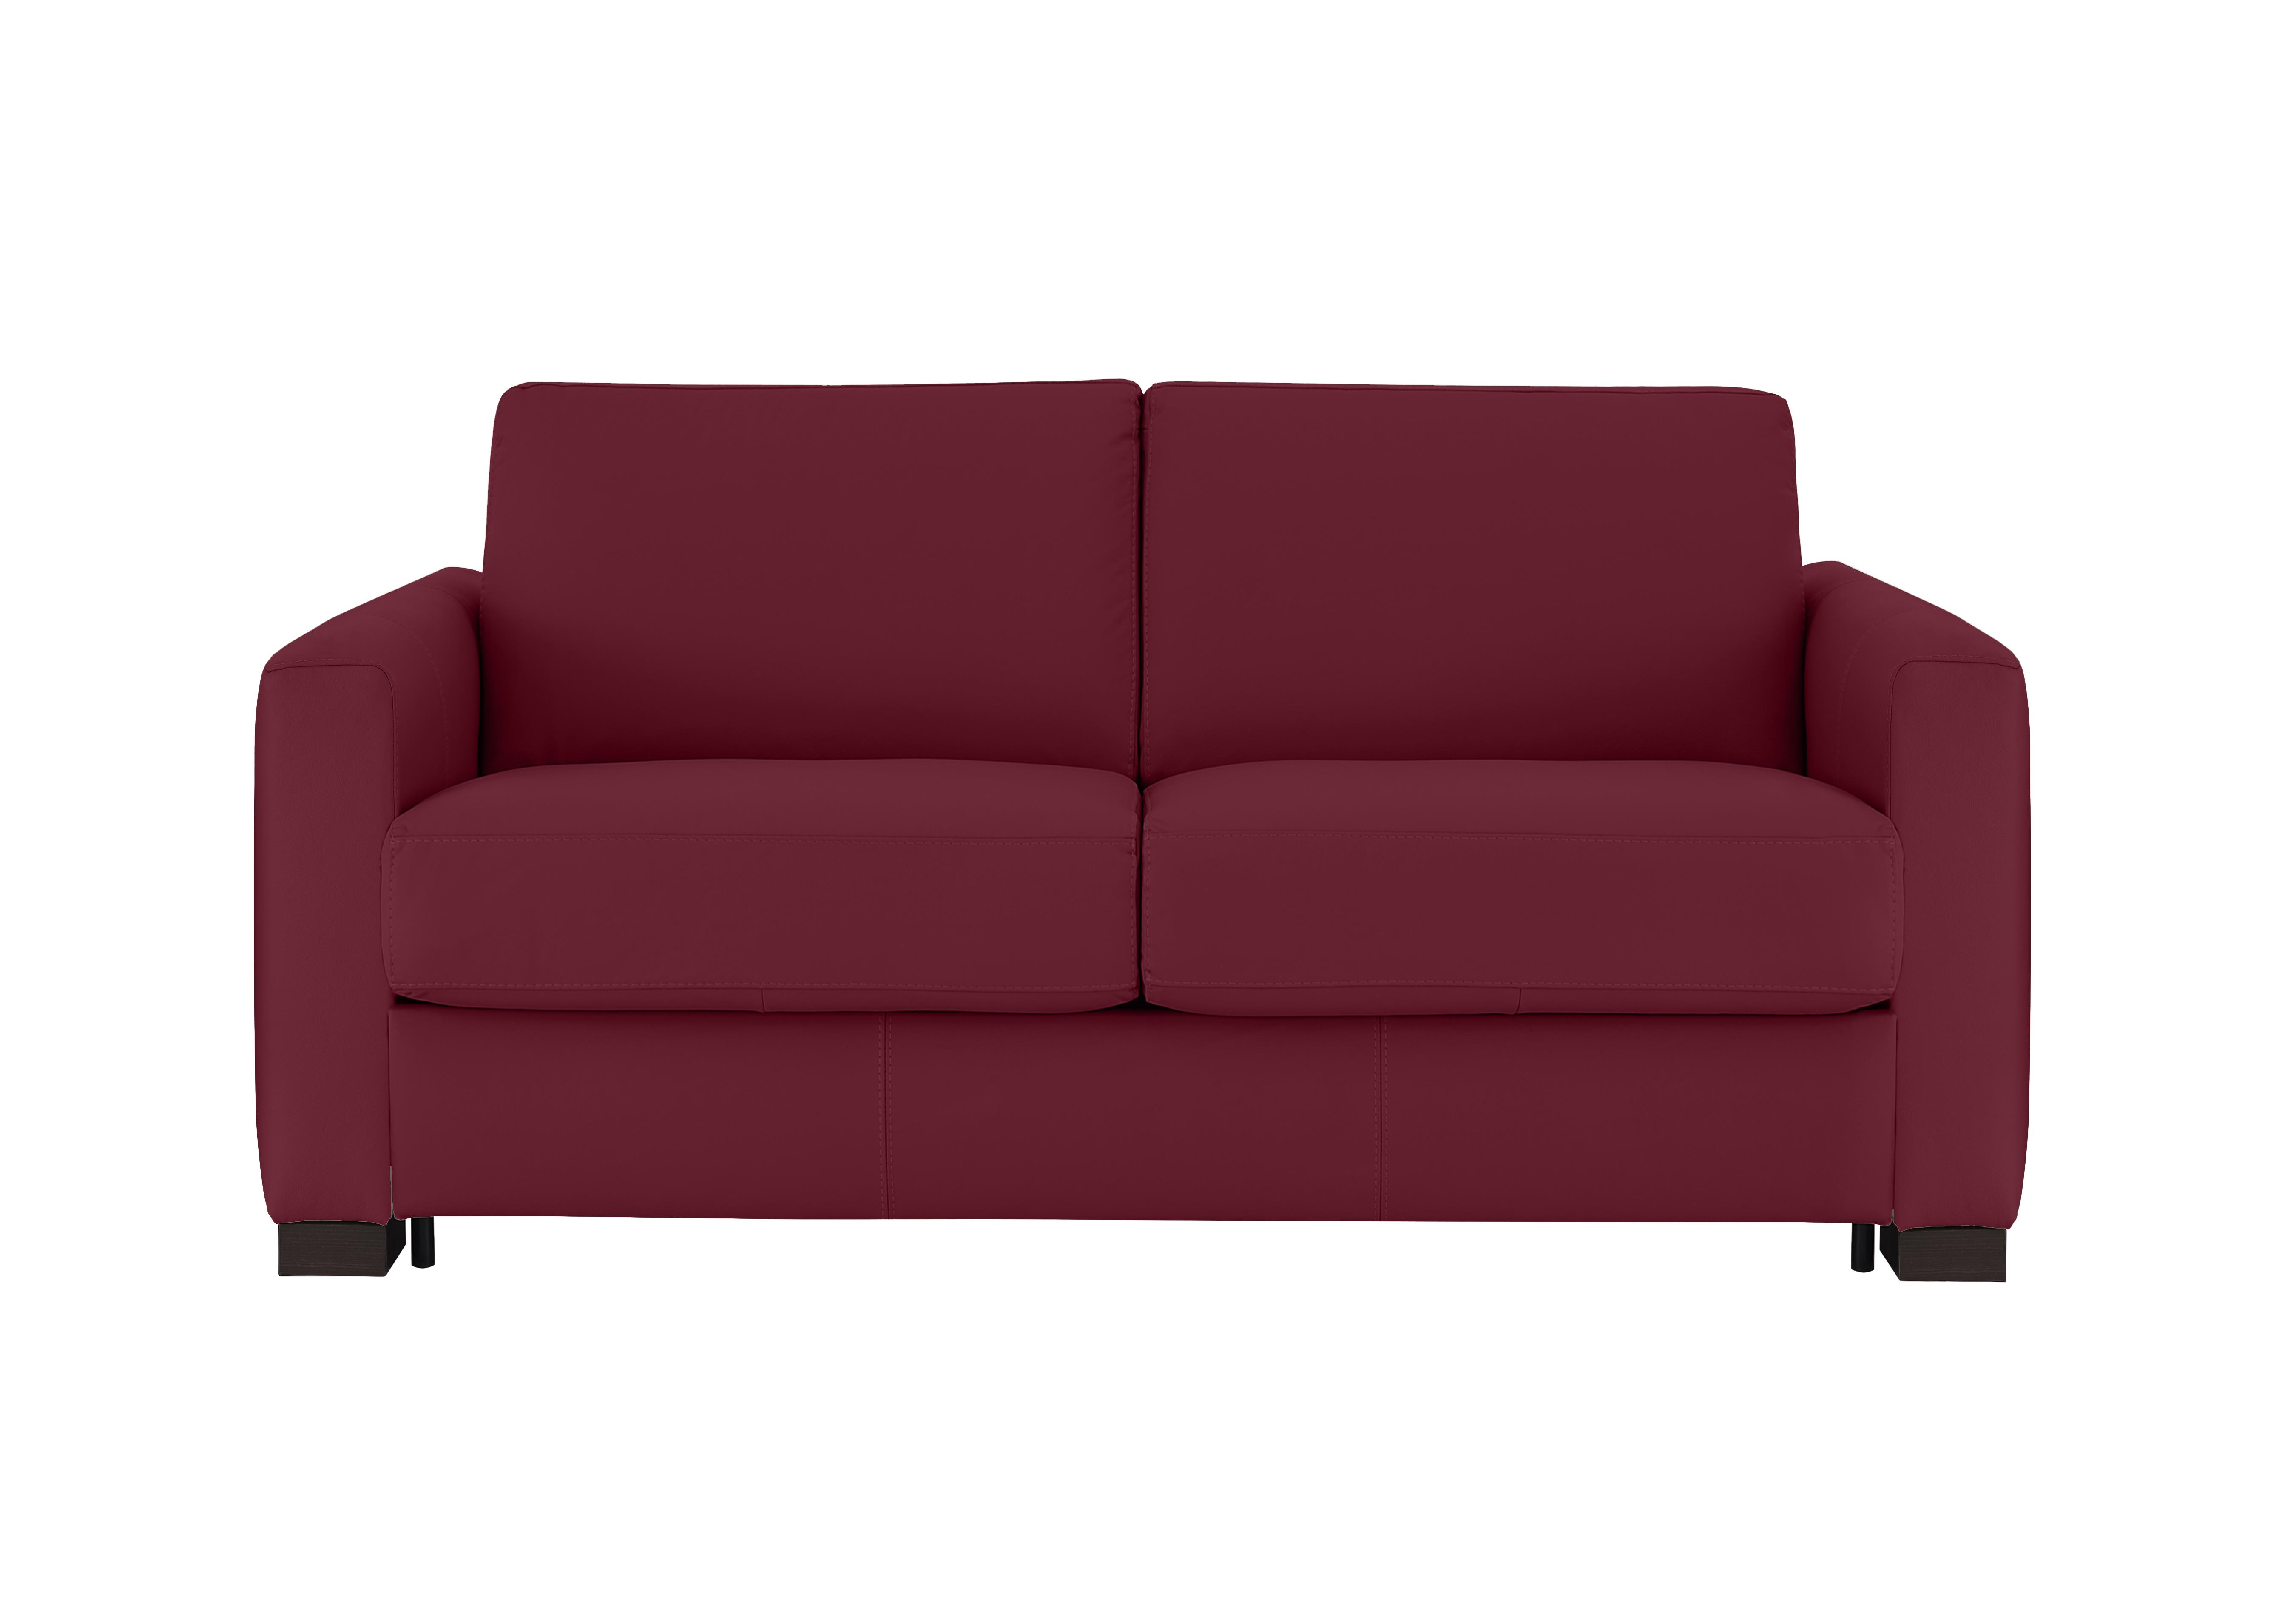 Alcova 2 Seater Leather Sofa Bed with Box Arms in Dali Bordeaux 1521 on Furniture Village